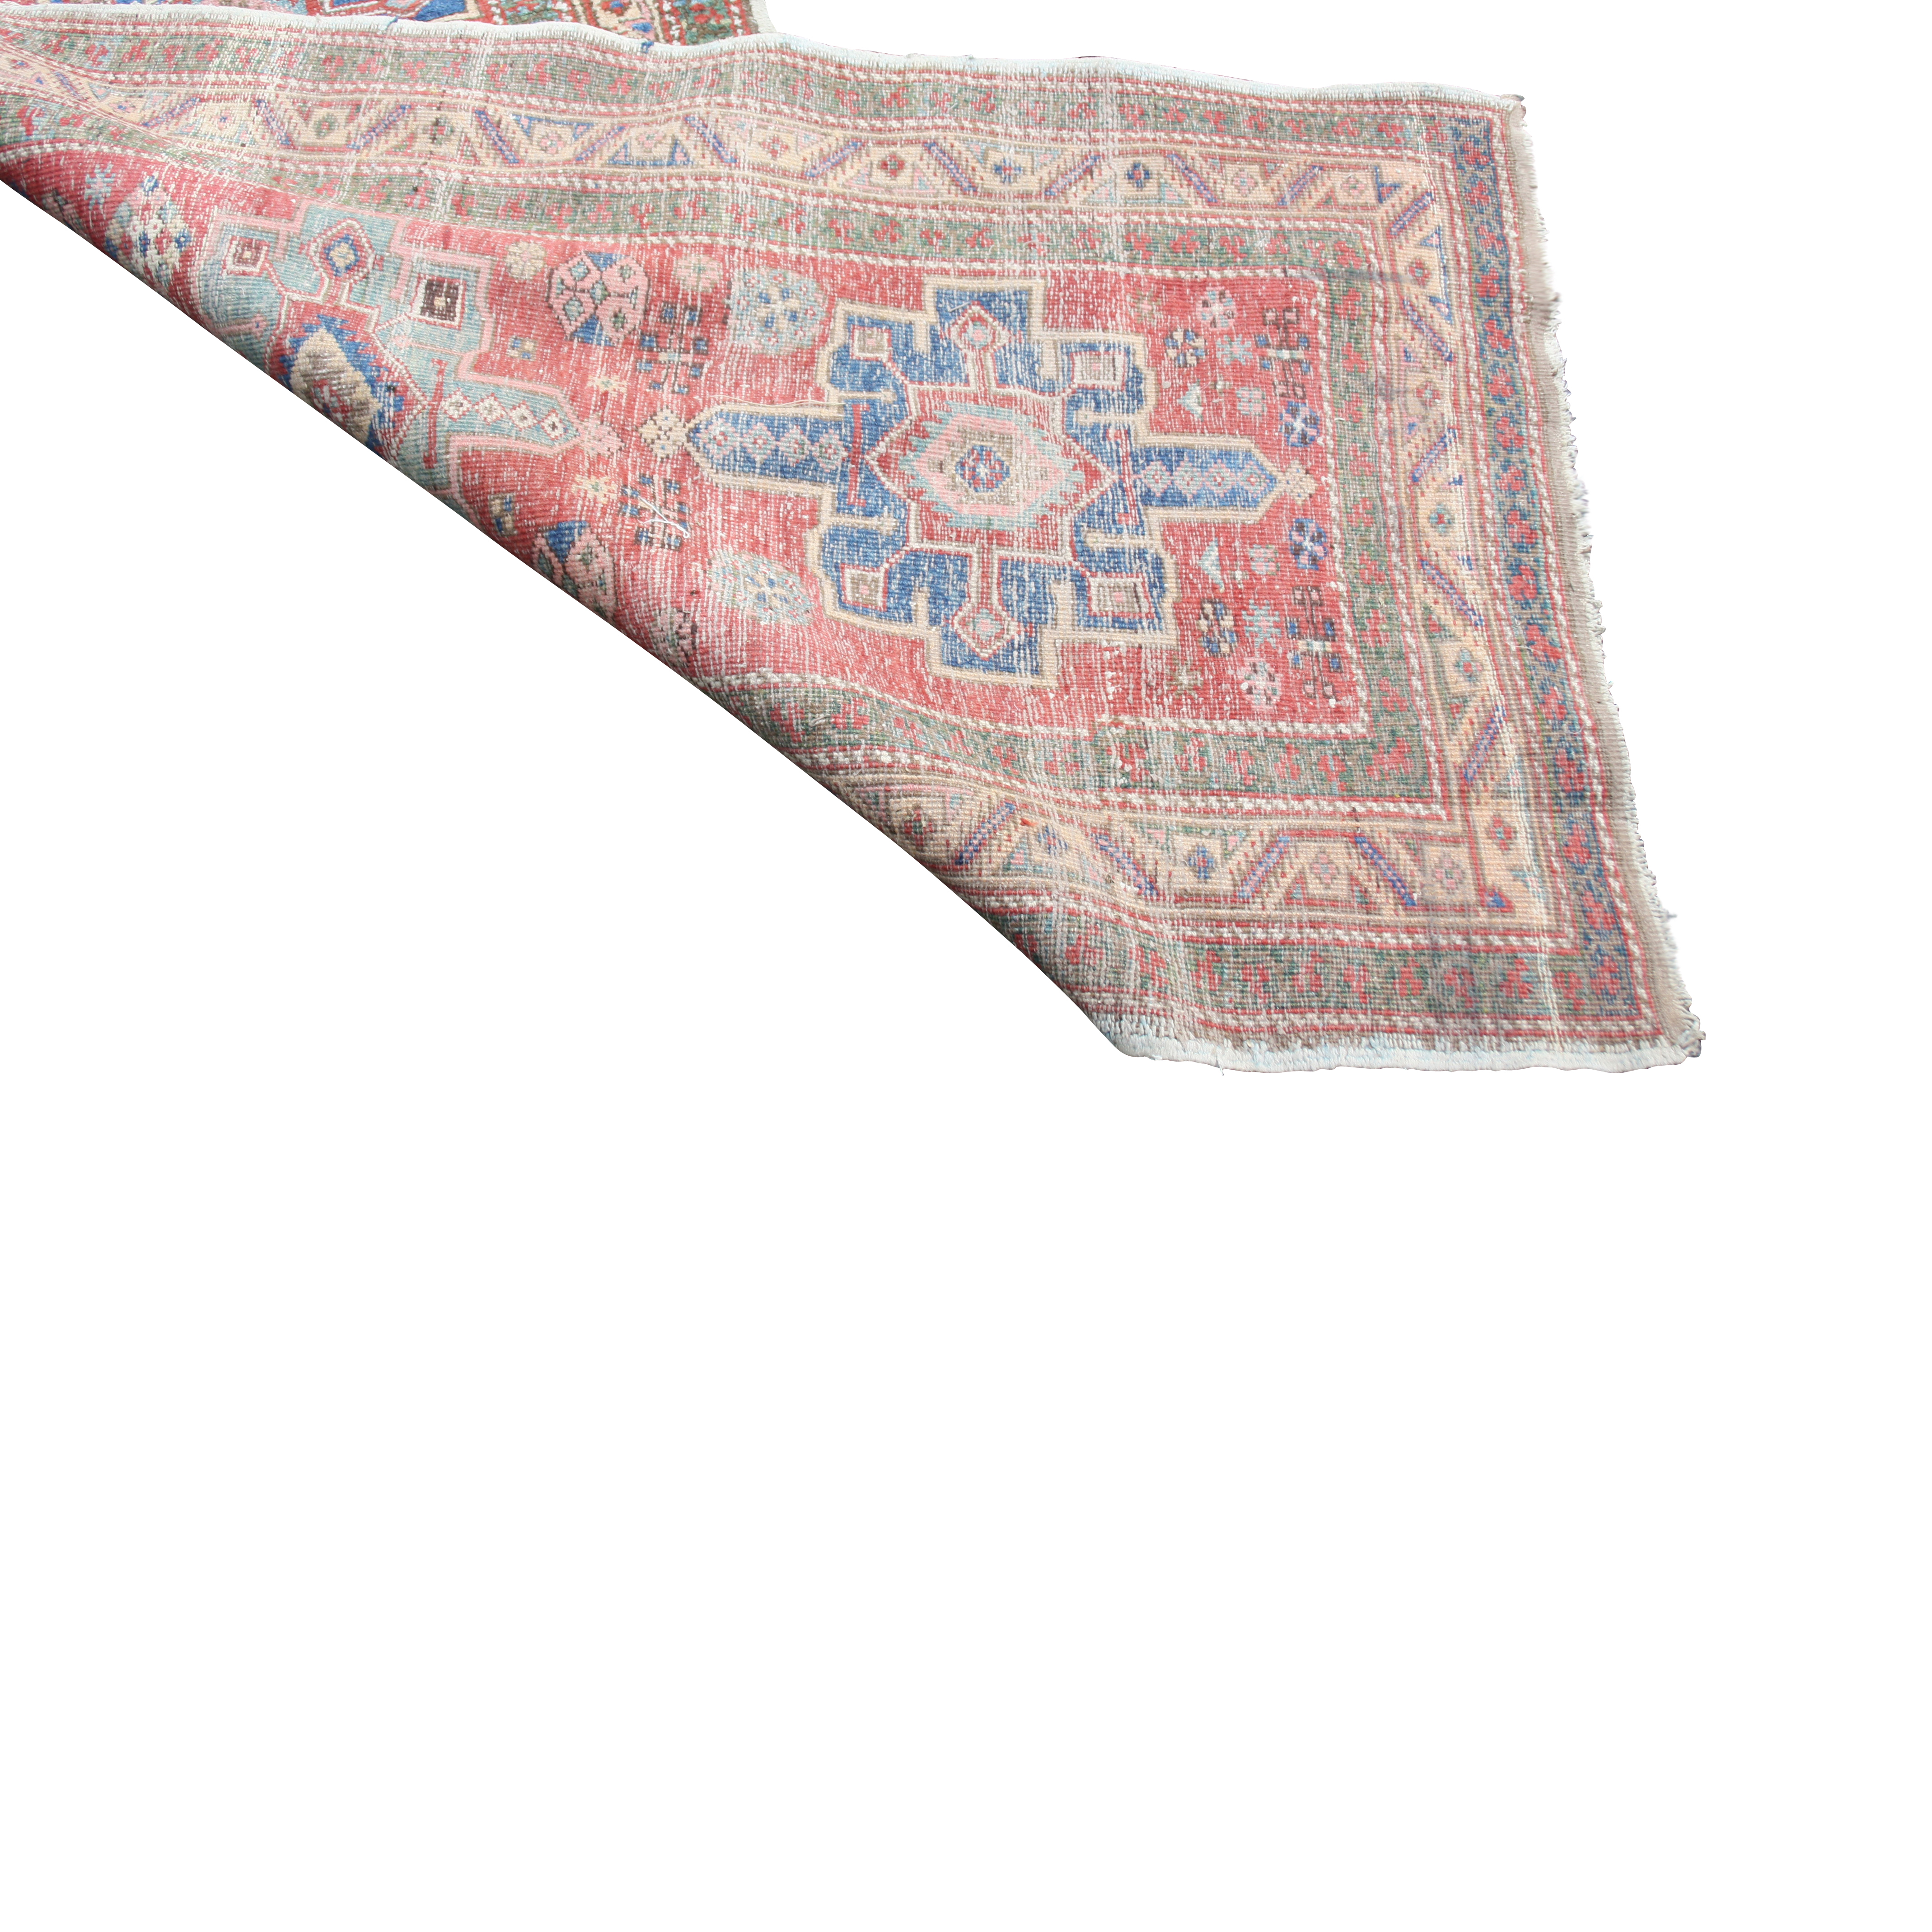 A Heriz runner, North West Persia, the madder field with seven indigo and pale blue medallions, - Image 2 of 10